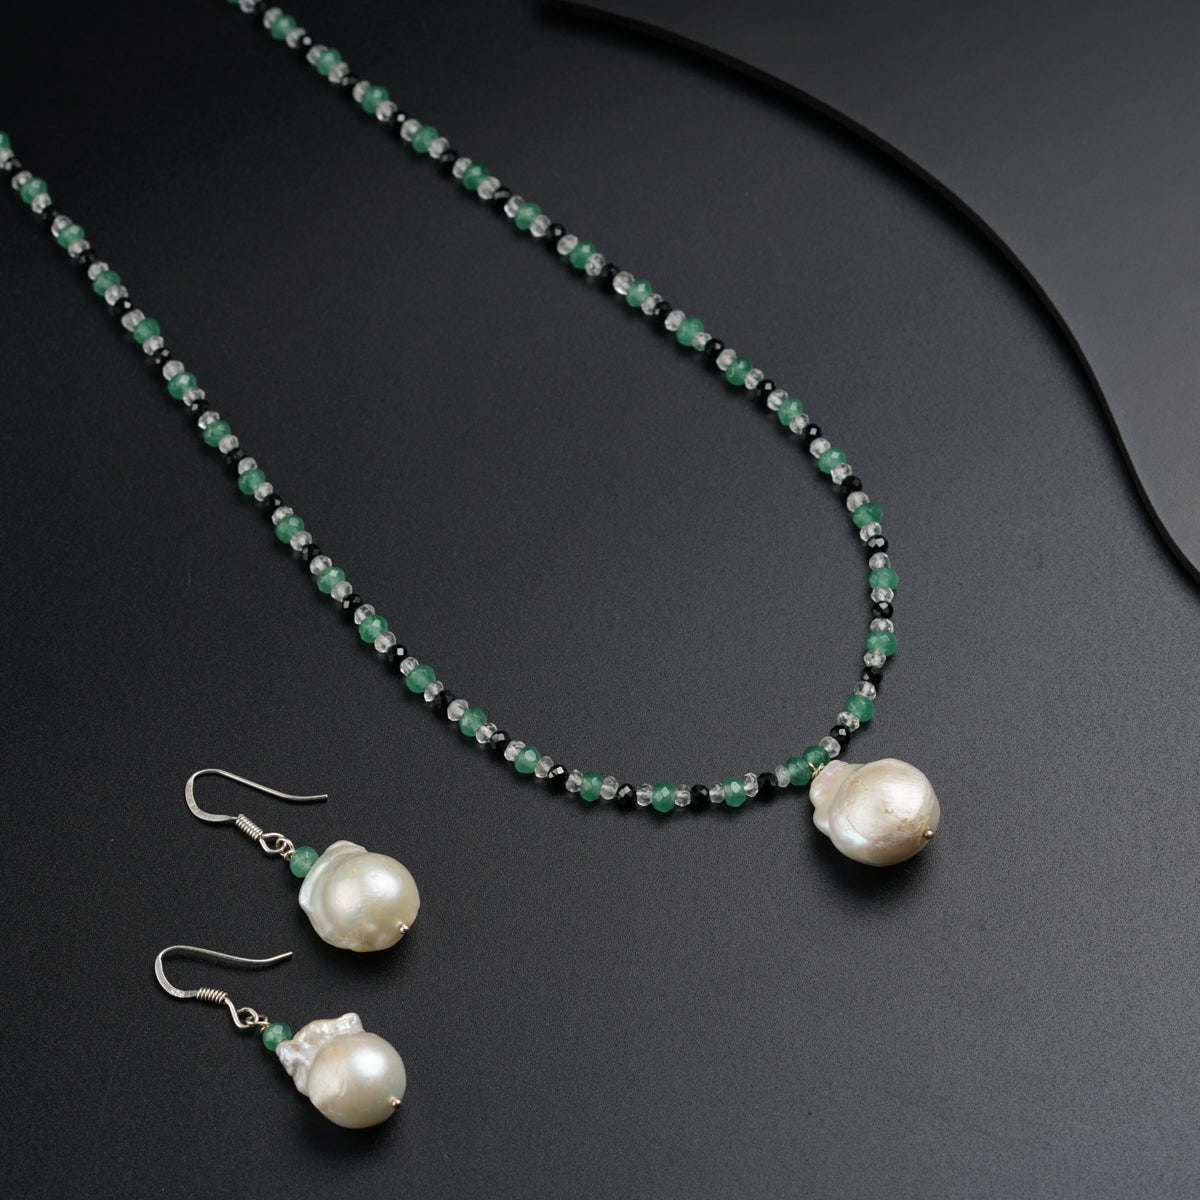 Handmade Silver Set with Jade, Black Spinels and Crystals